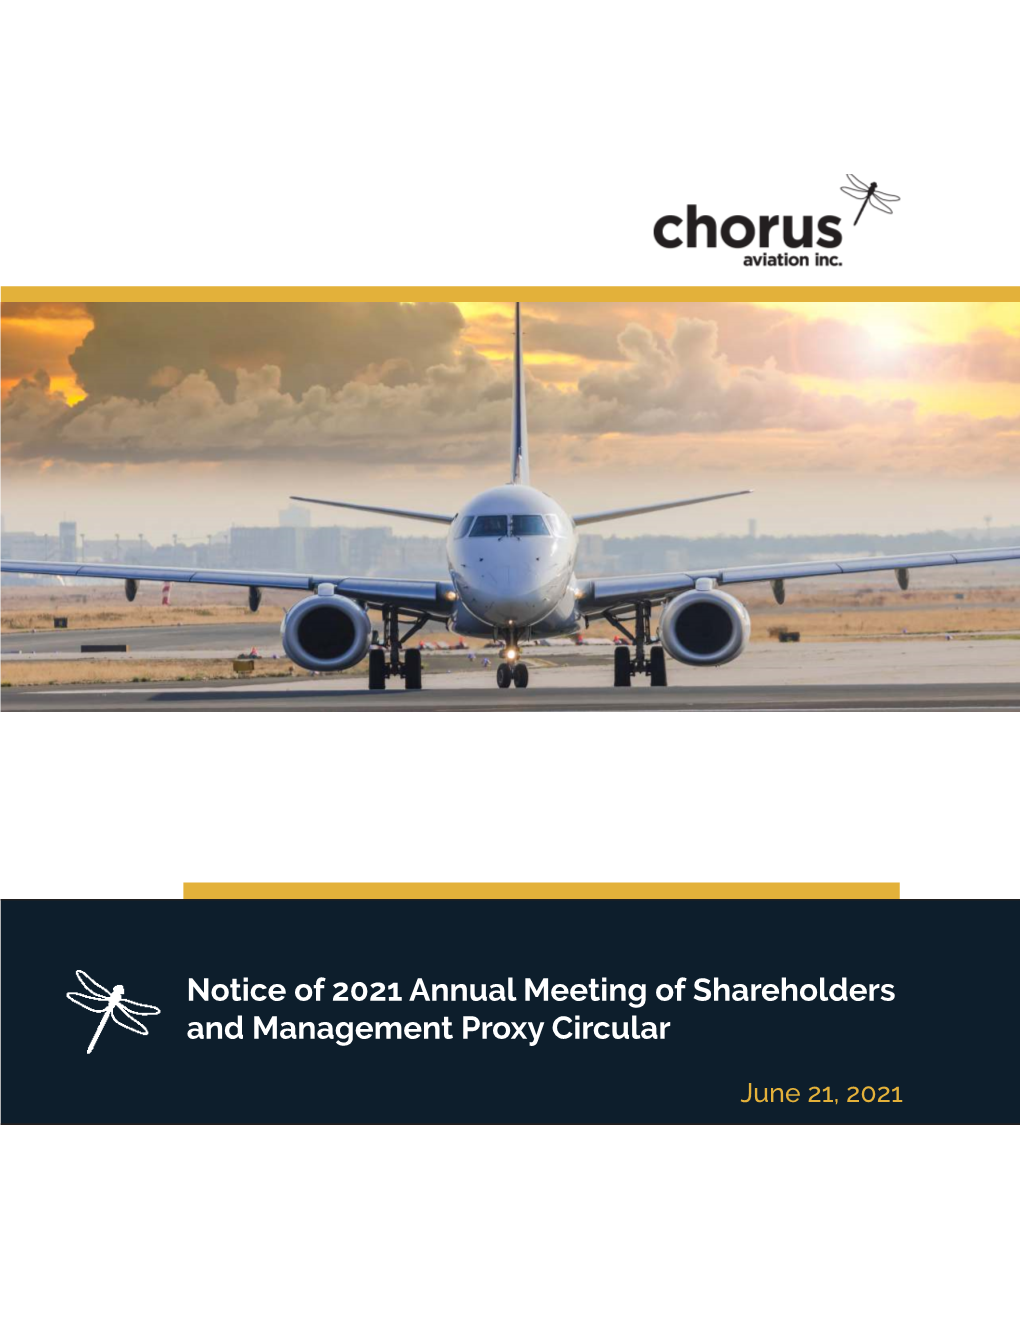 Notice of 2021 Annual Meeting of Shareholders and Management Proxy Circular